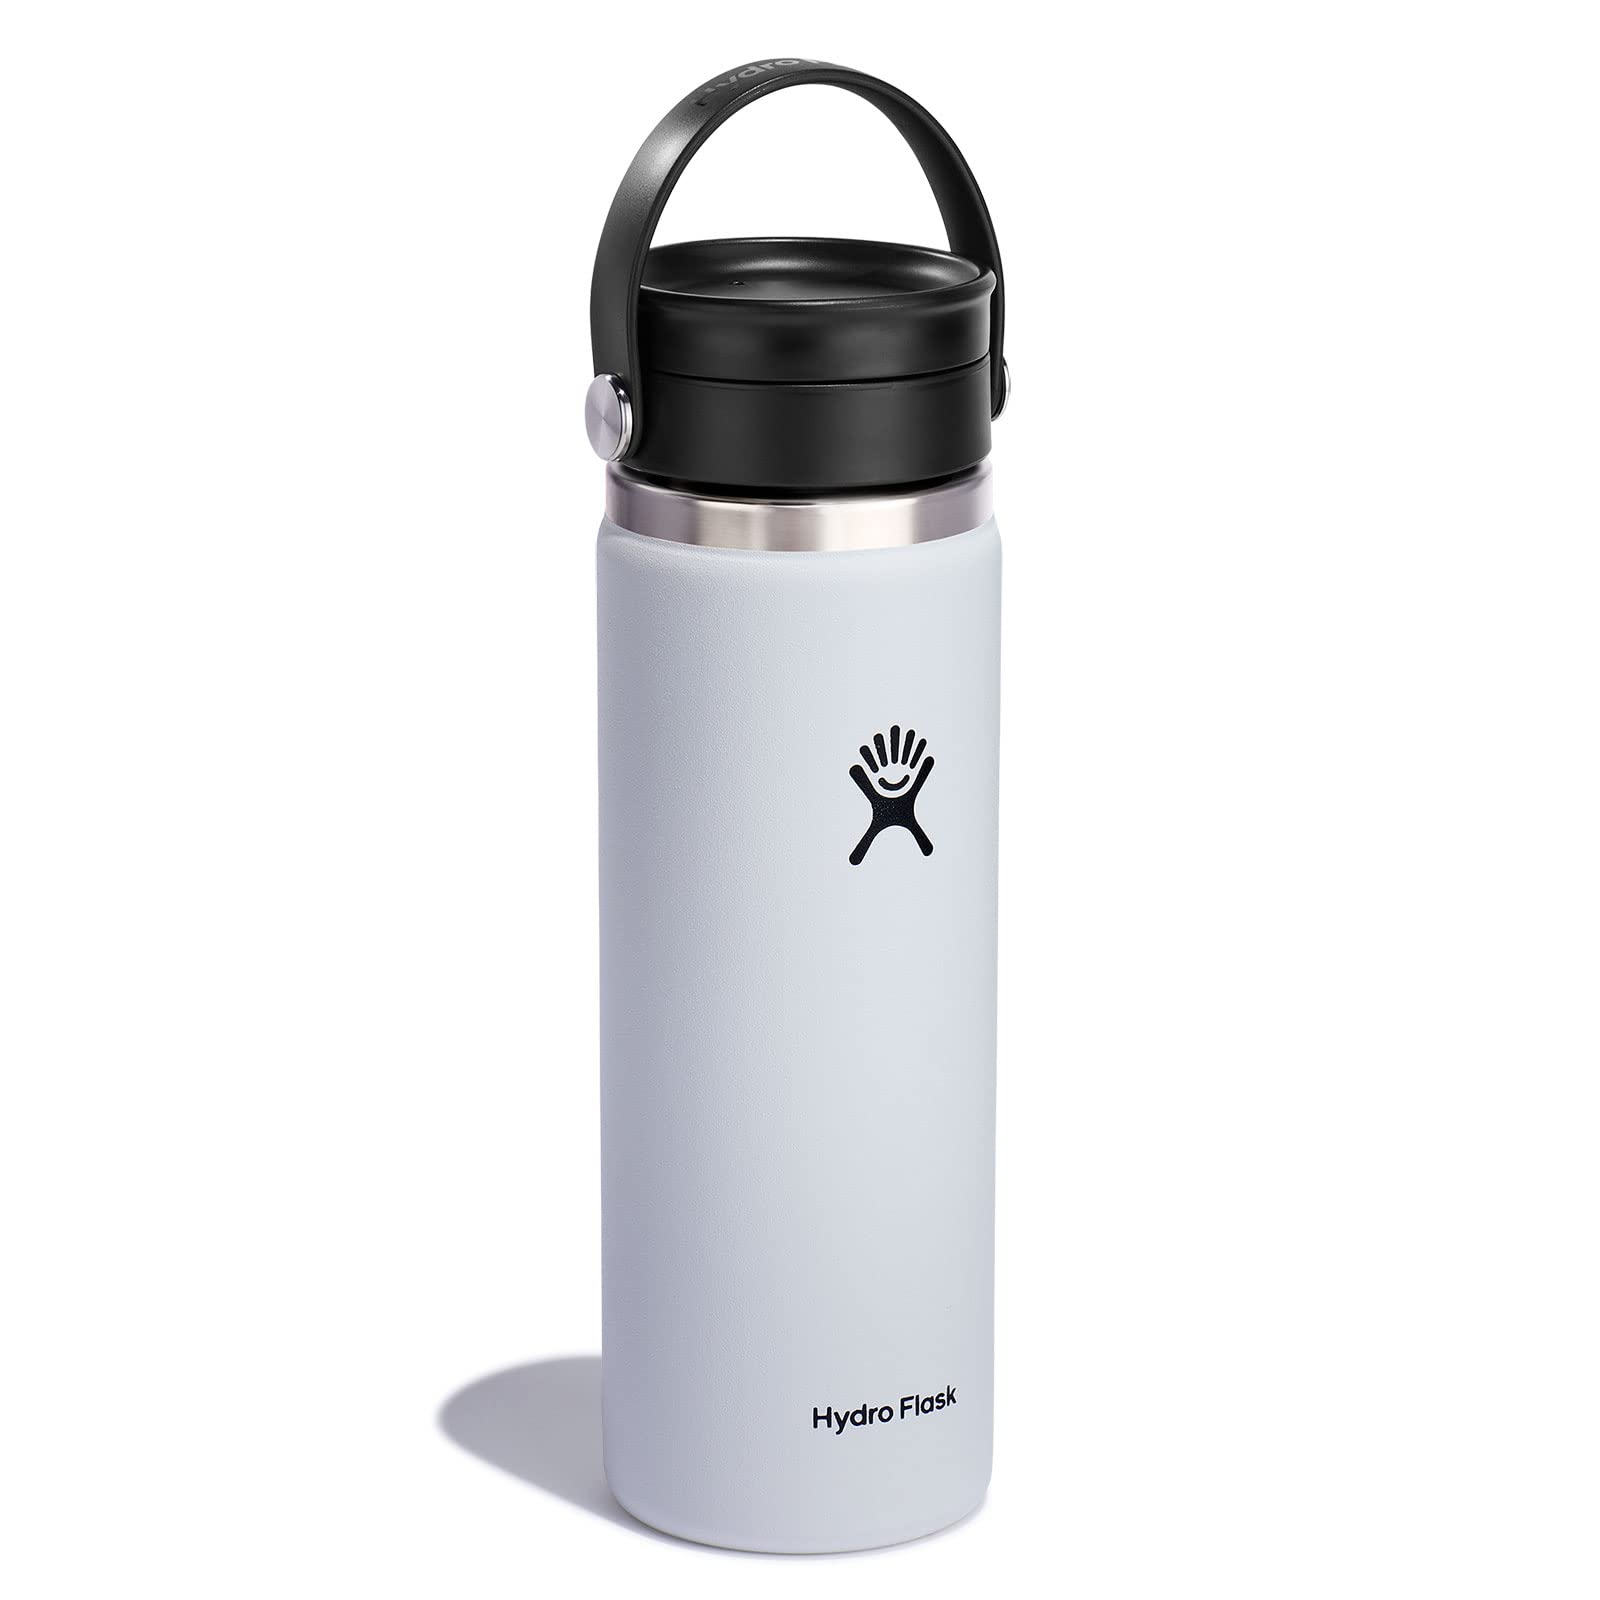 Hydro Flask Wide Mouth Bottle w/ Flex Sip Lid (White) $14.22 + Free Shipping w/ Prime or on orders over $25